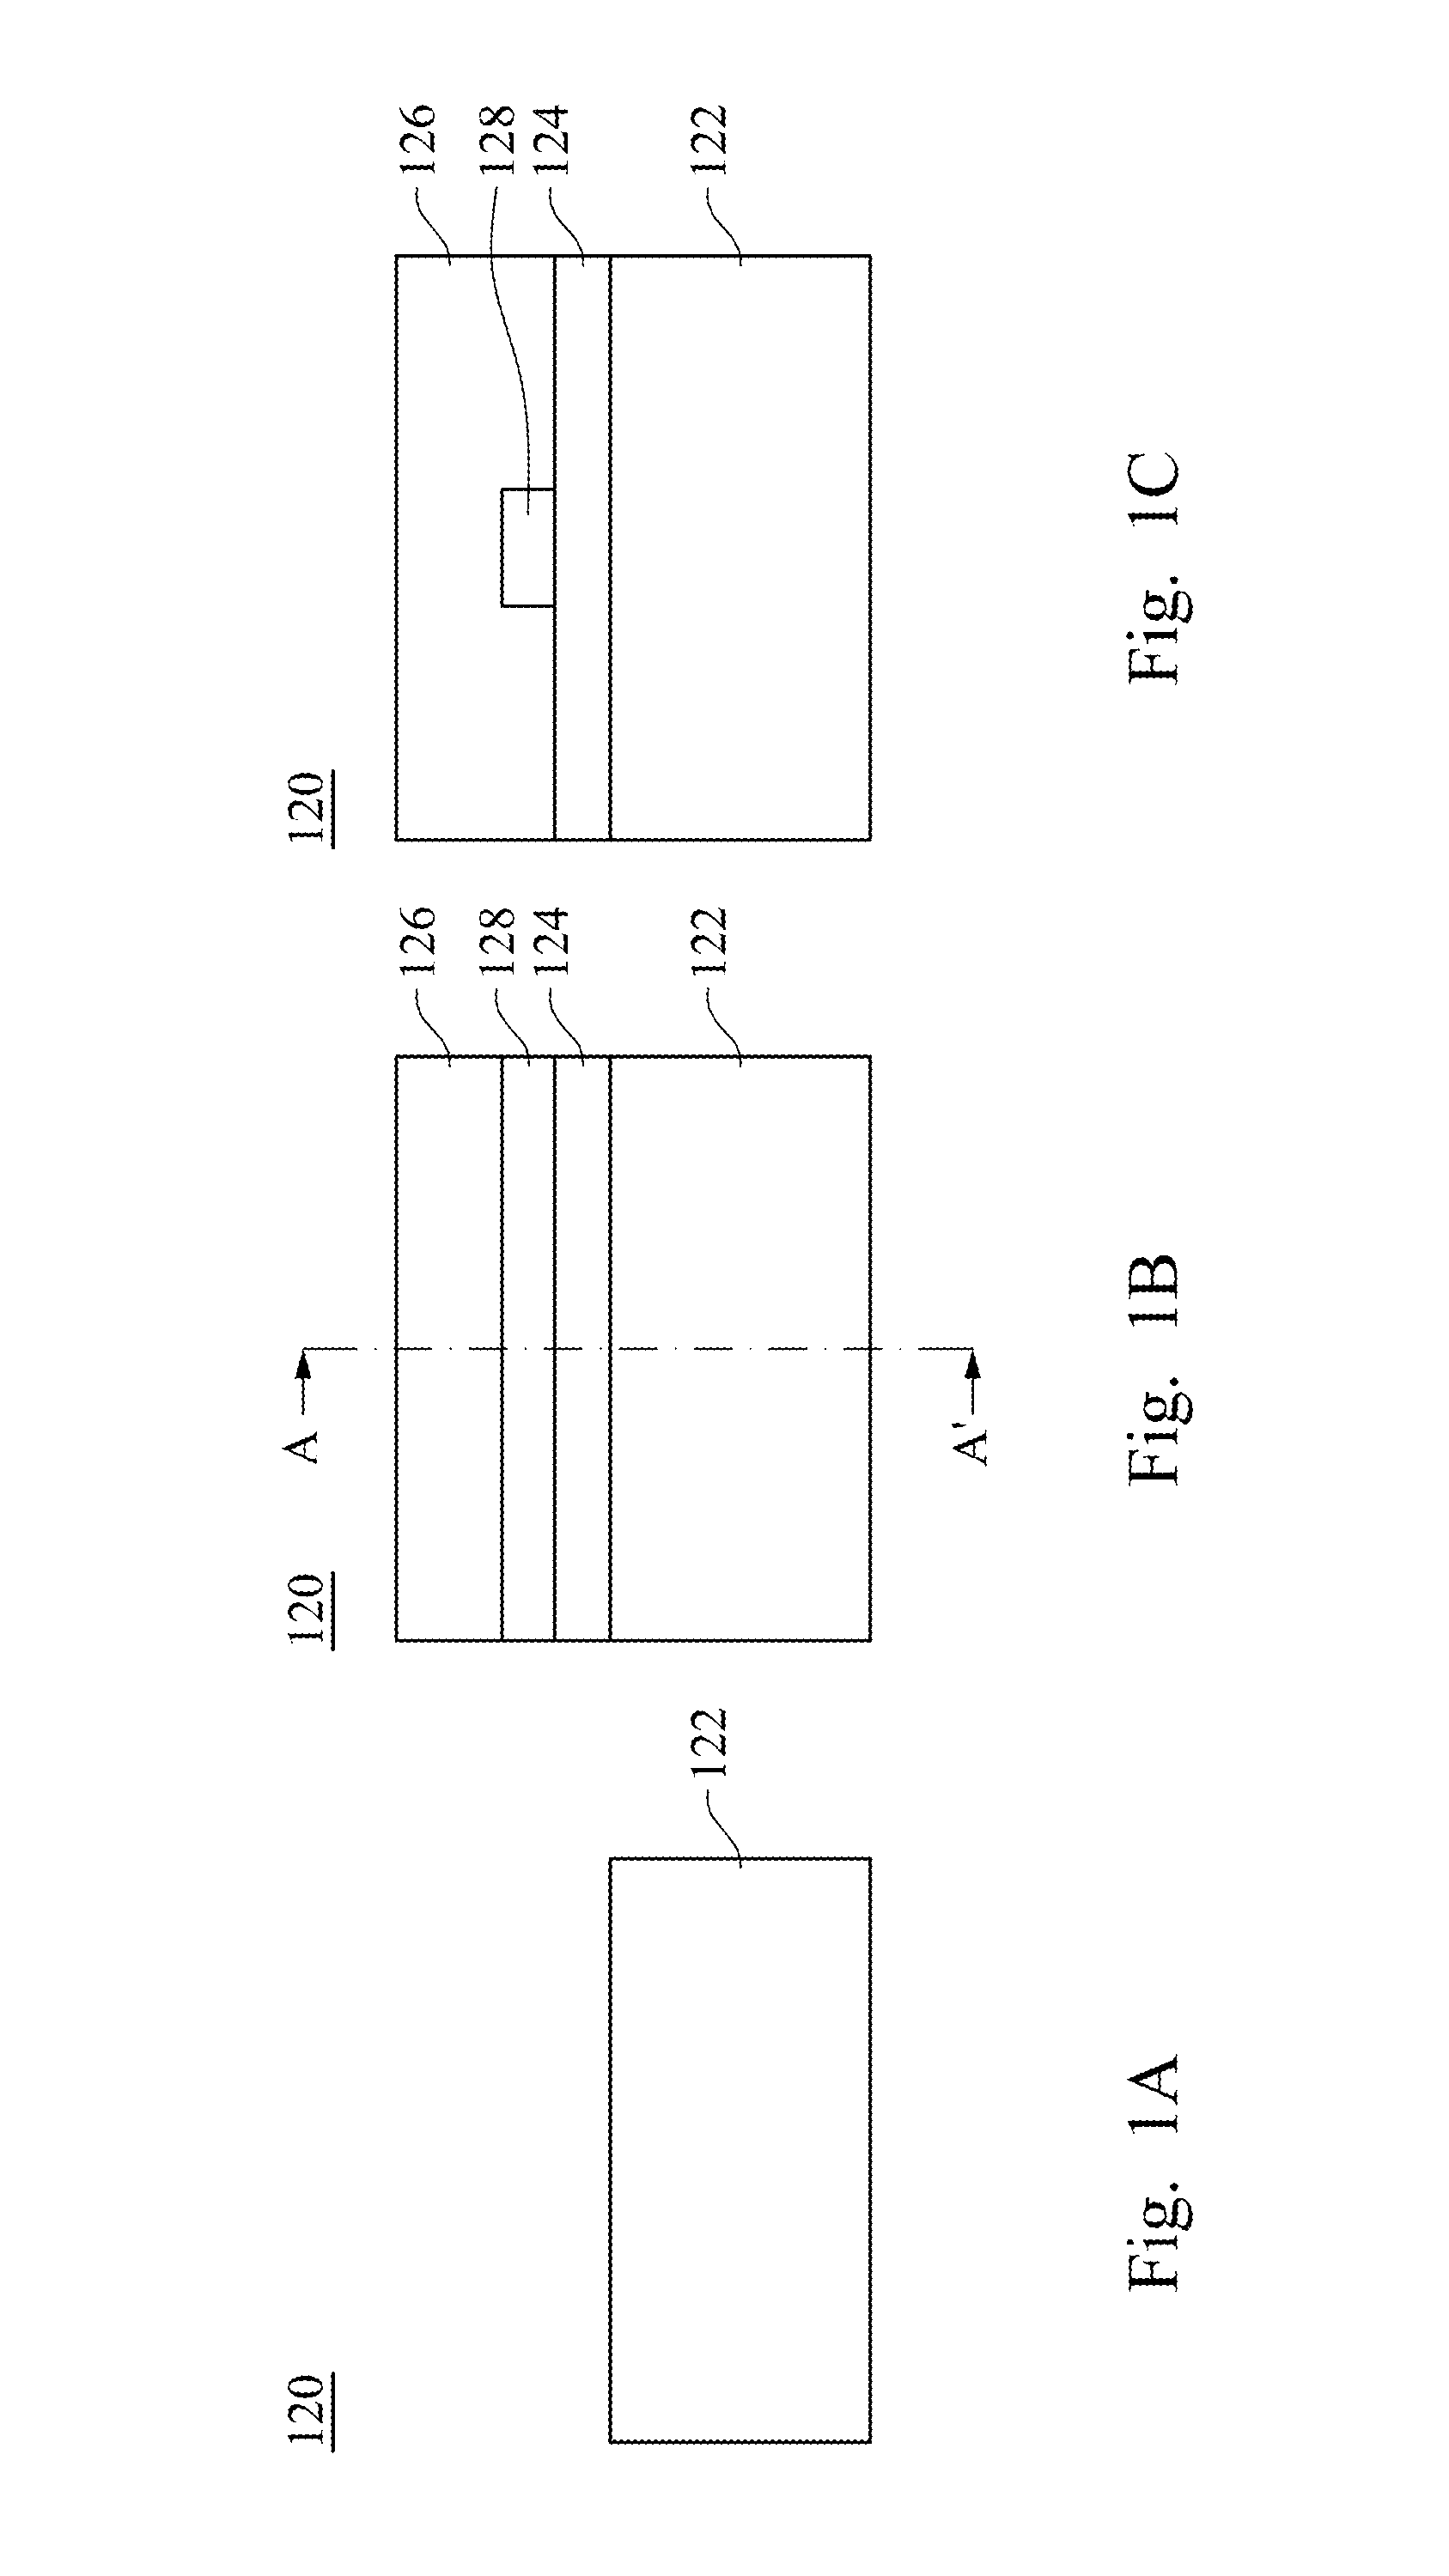 Opto-electronic circuit board and method for assembling the same